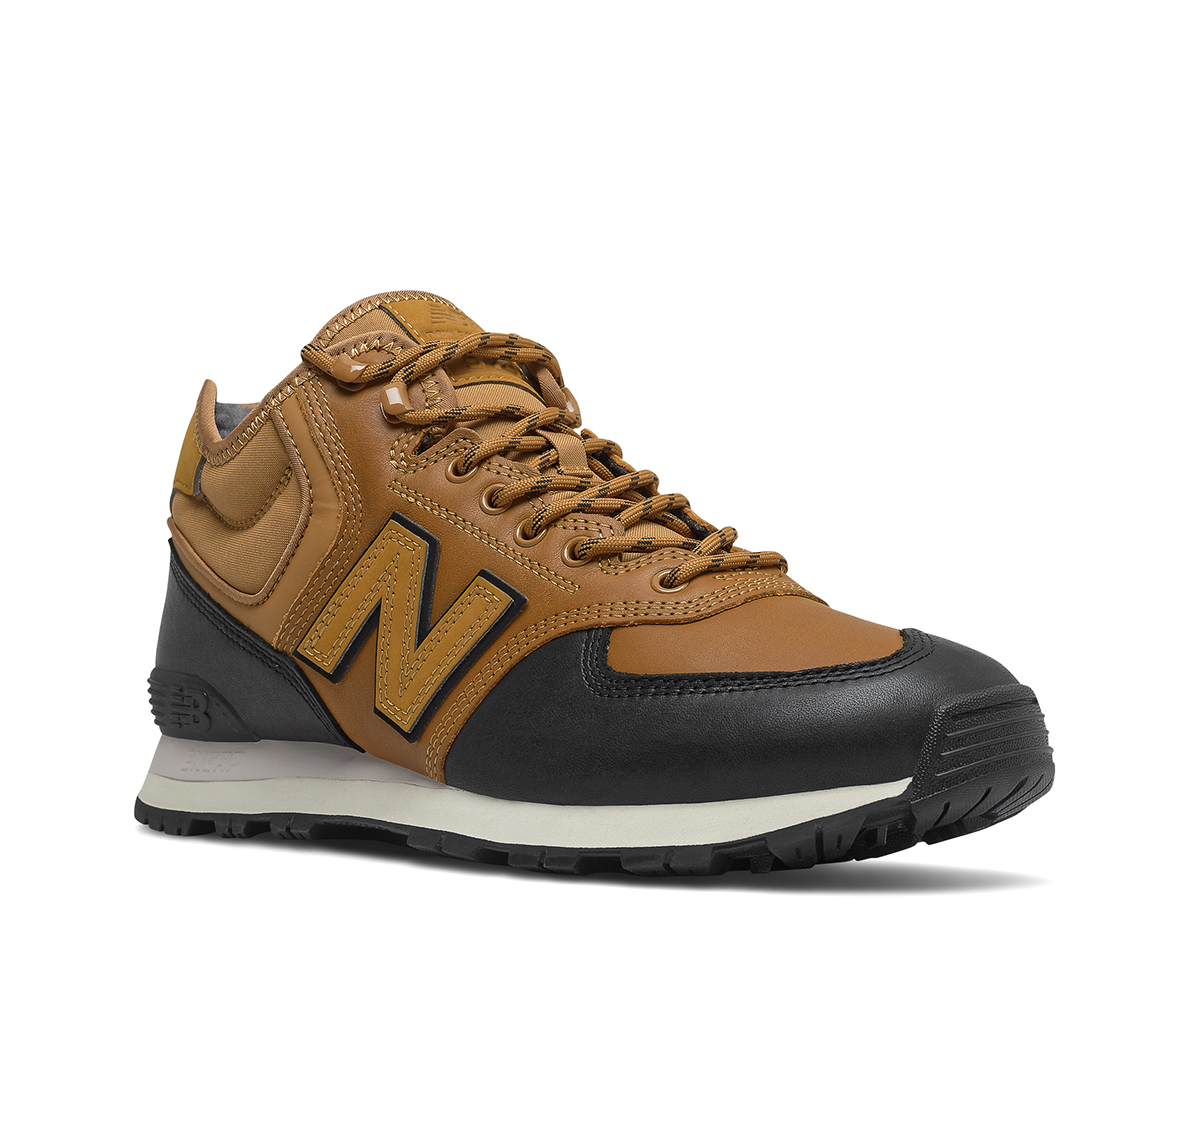 New Balance 574 Boot - Workwear front